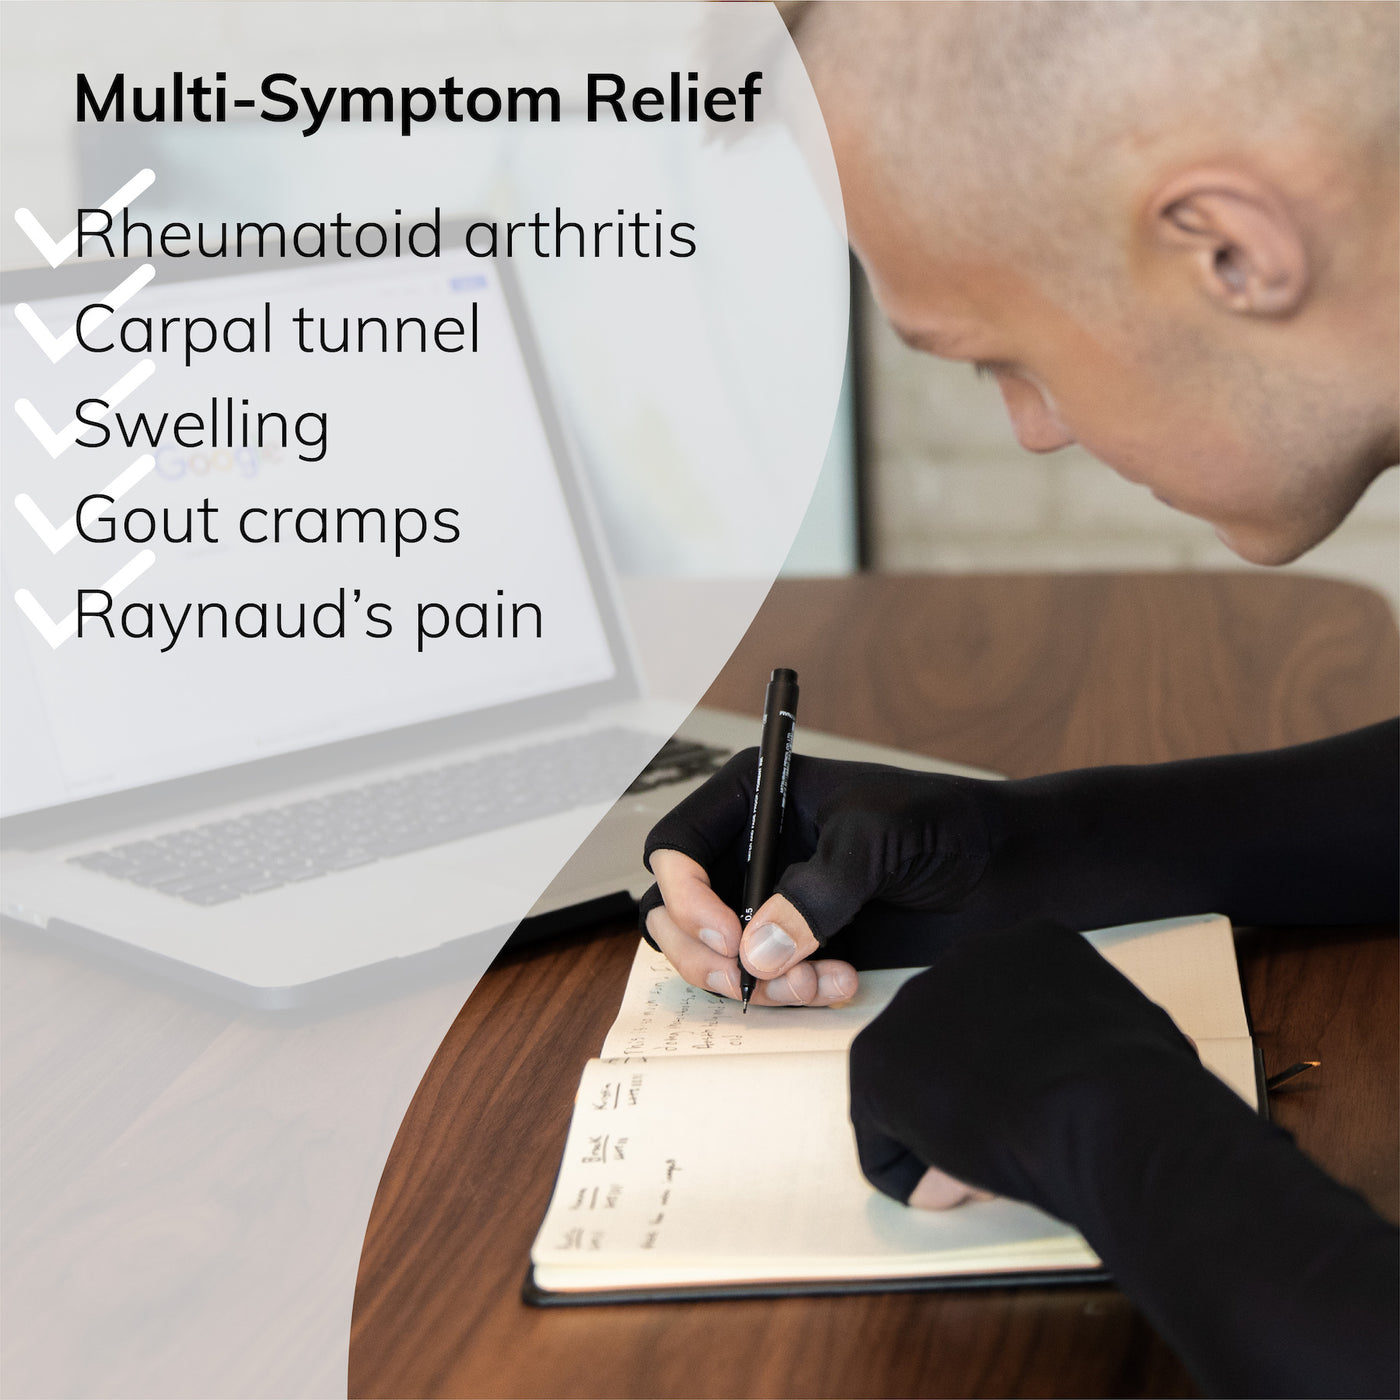 Our compression arthritis gloves offer pain relief for rheumatoid arthritis, carpal tunnel, and raynauds pain